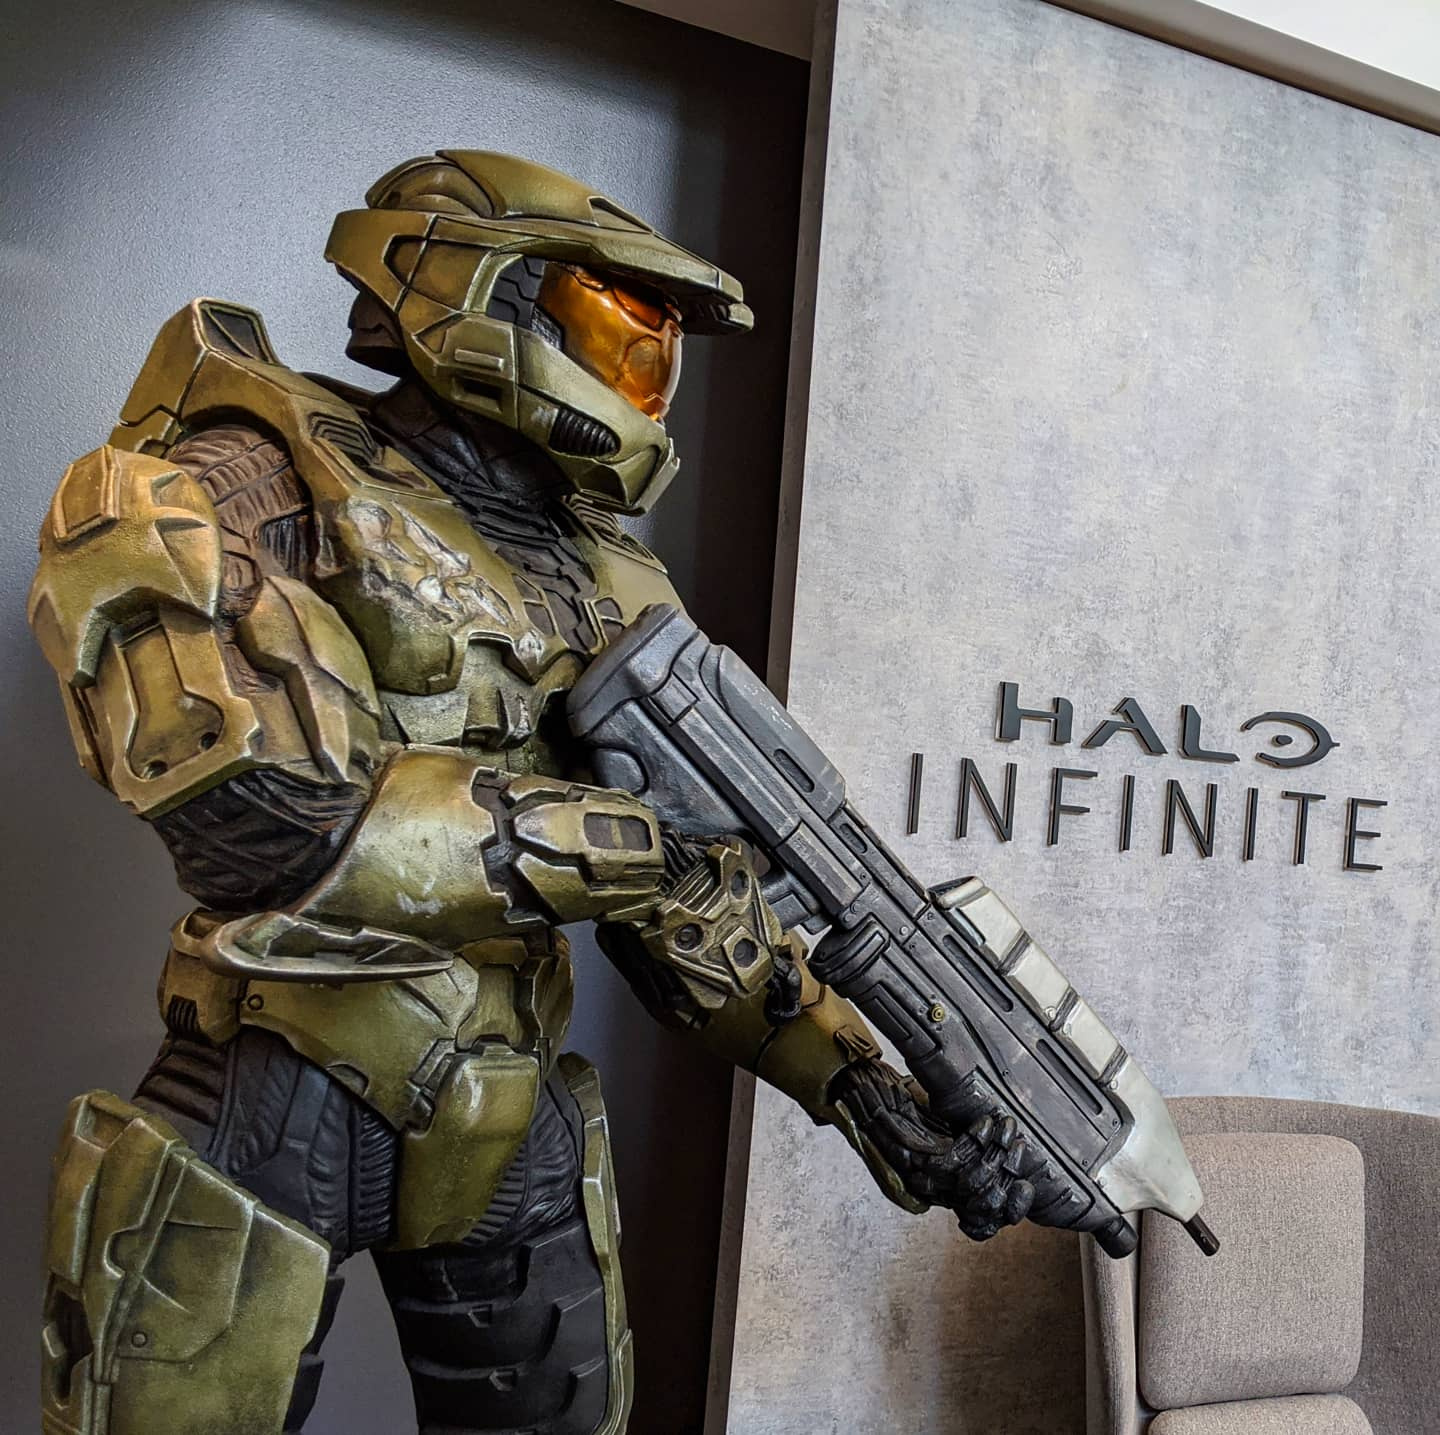 343 Community Manager Shows Off Studio's New Halo Infinite Sign - Xbox News